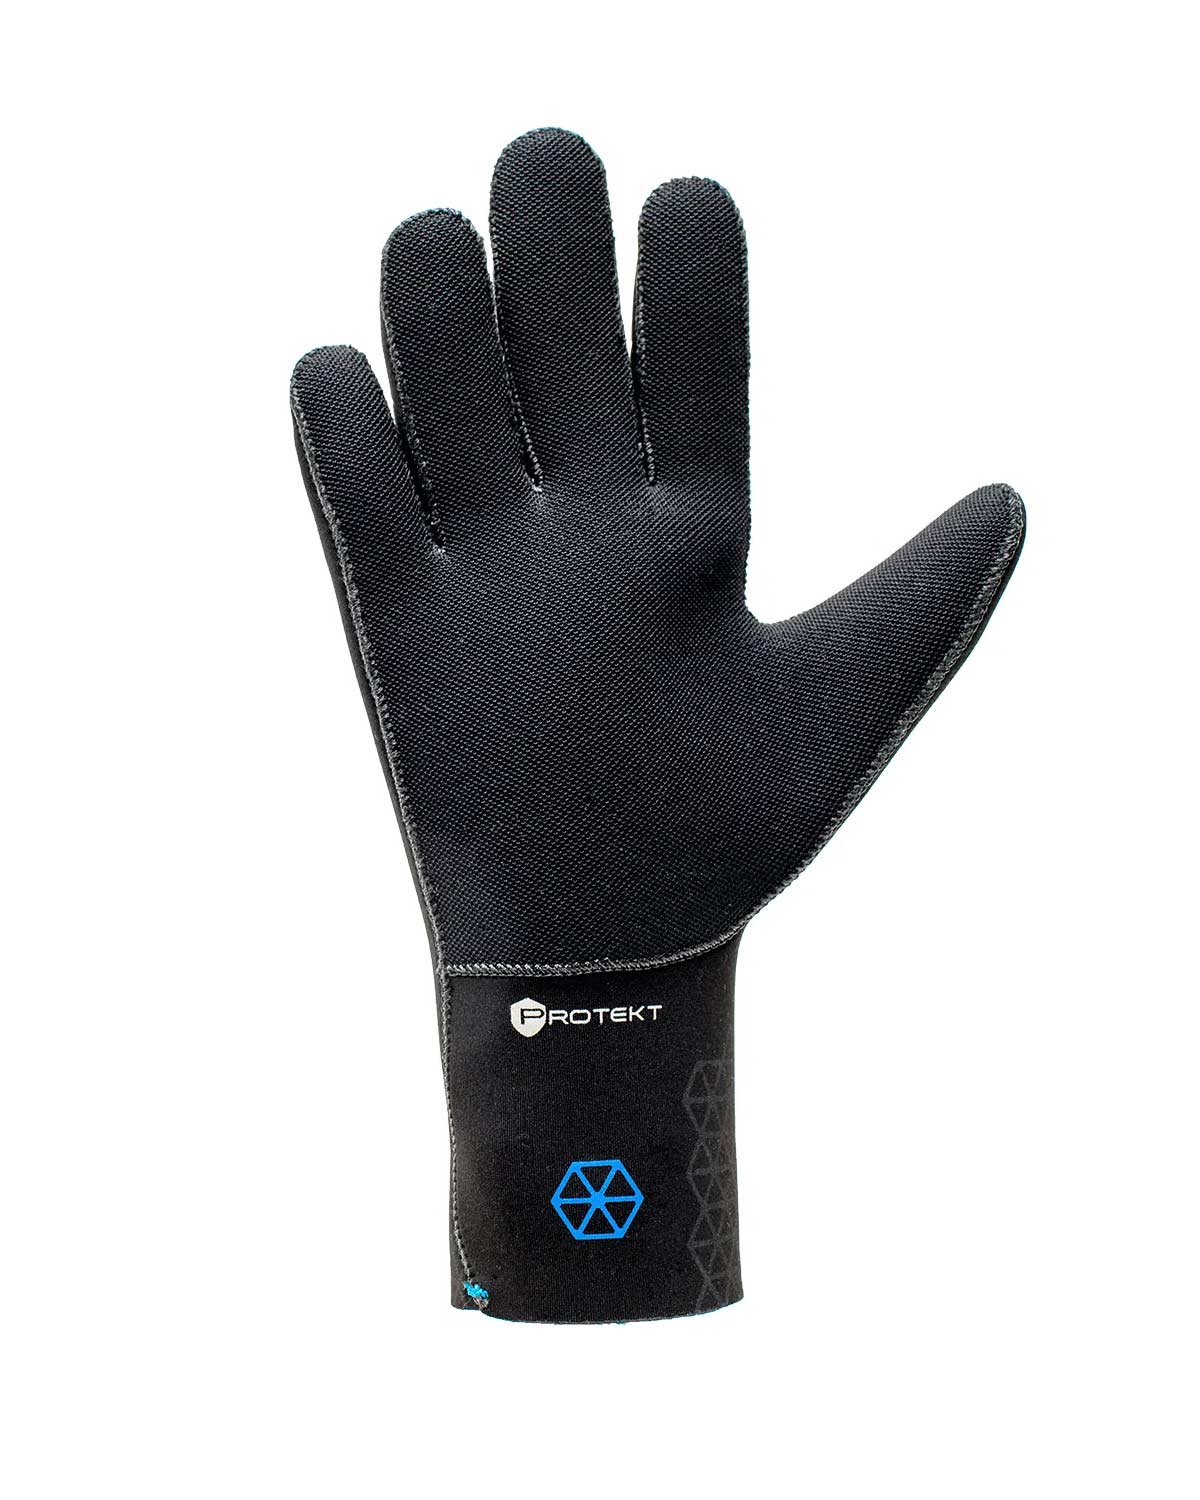 3mm BARE Wetsuit Gloves